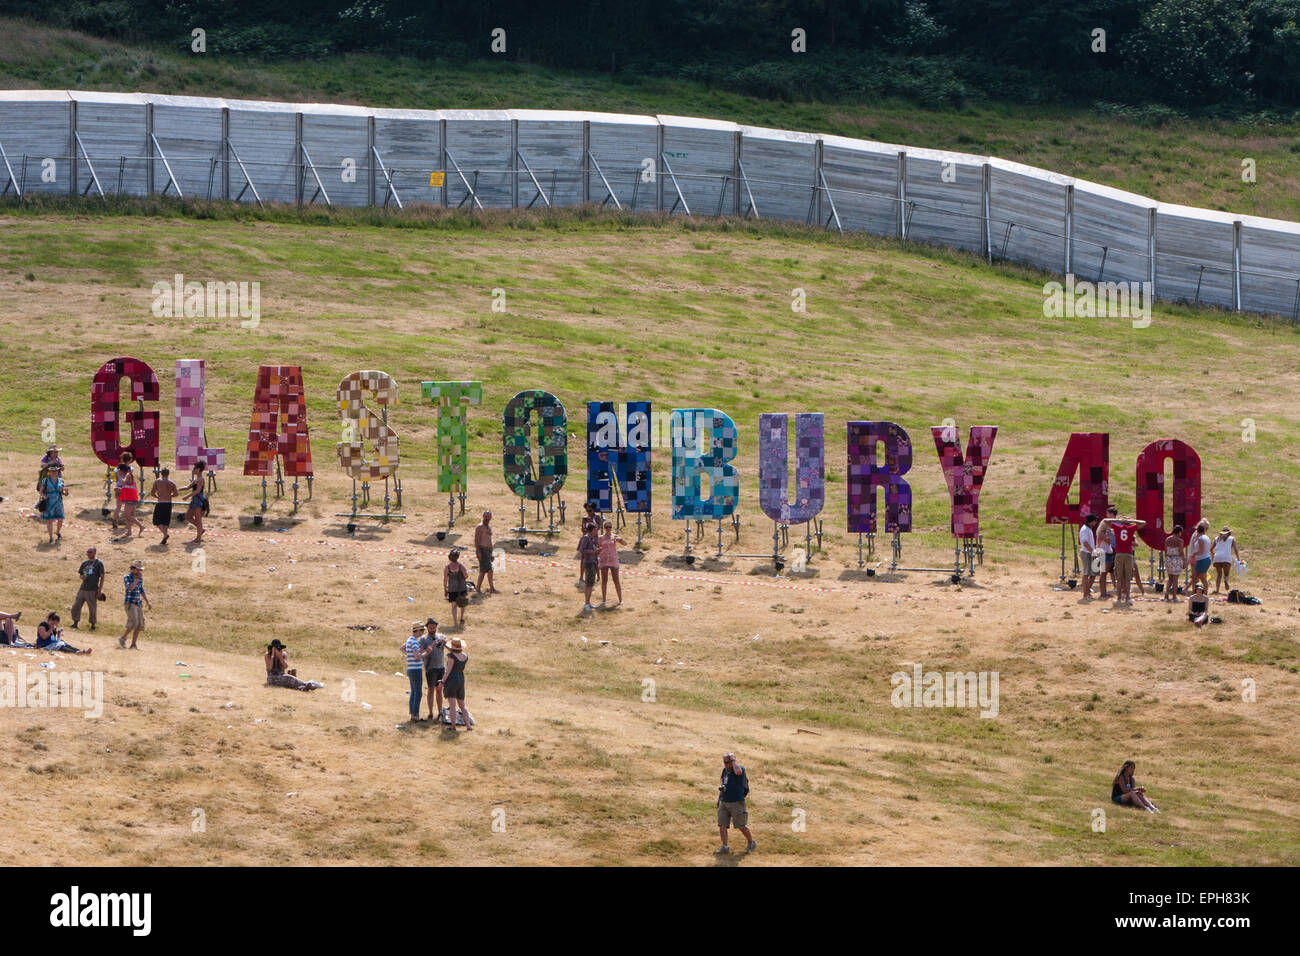 Ring of steel fence and 40th anniversary sign (1970-2010) at Glastonbury Festival/ 'Glasto' held on working farm, Worthy Farm, n Stock Photo